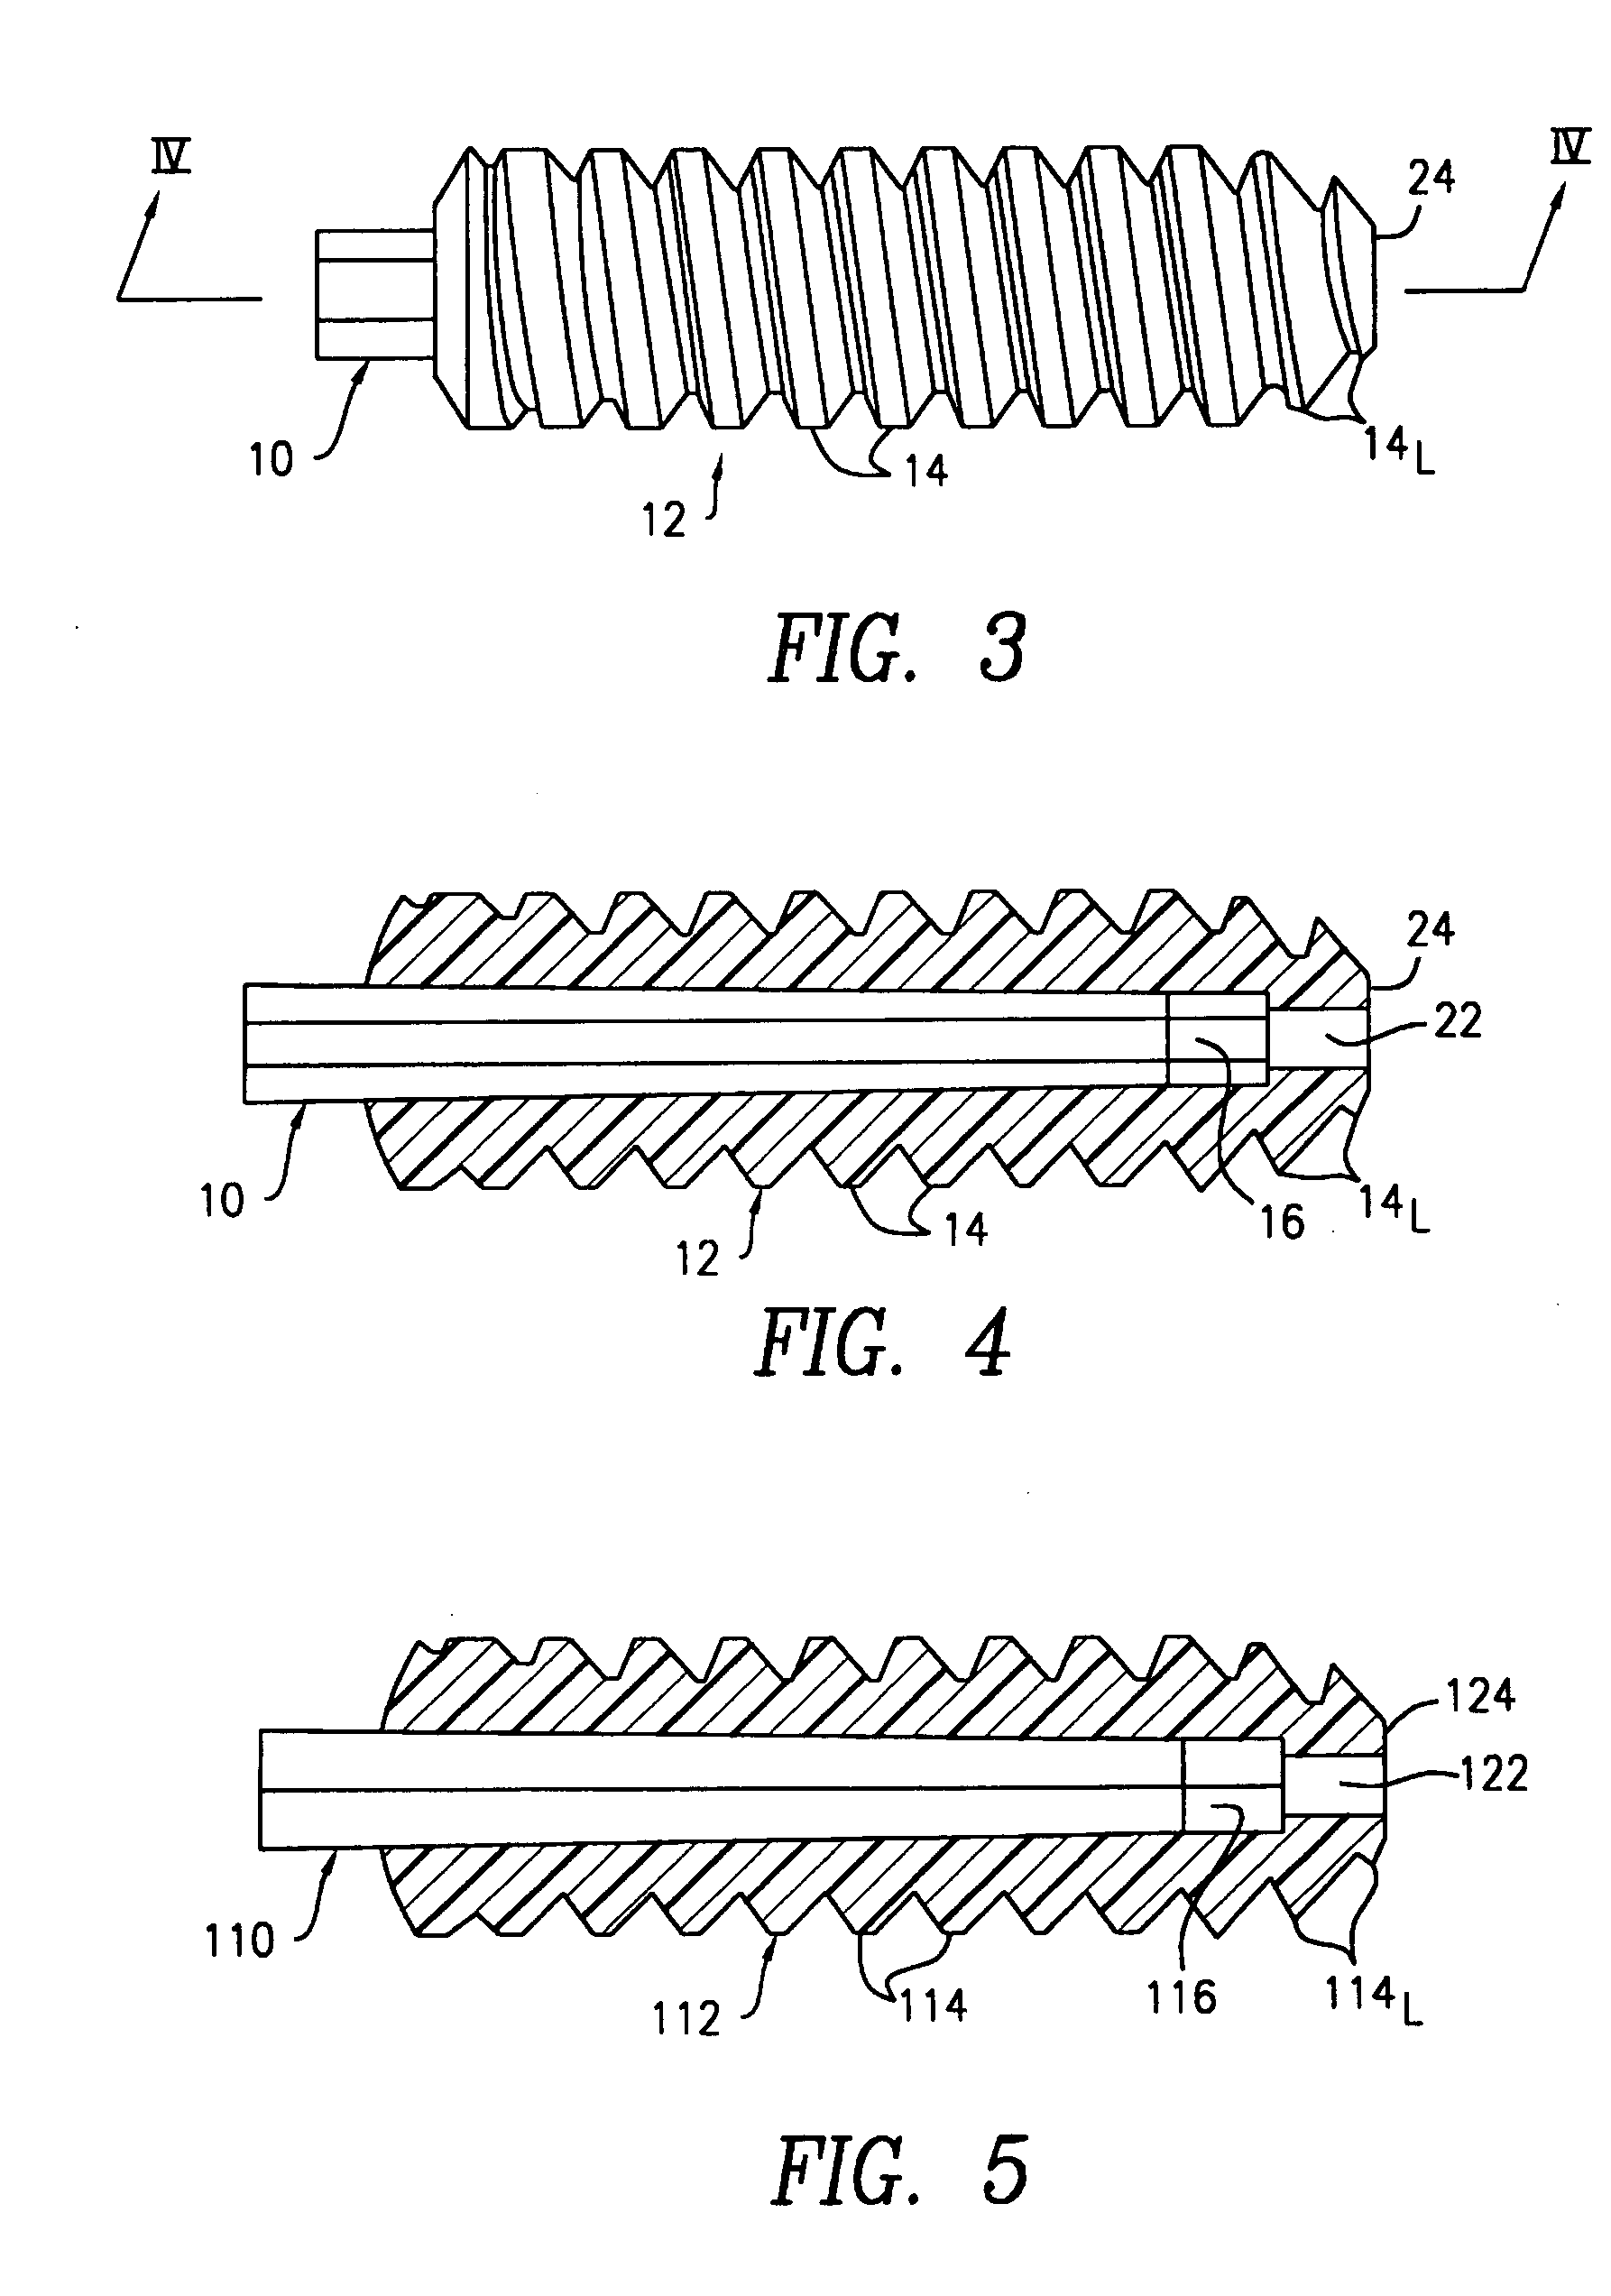 Polymer-based orthopedic screw and driver system with increased insertion torque tolerance and associated method for making and using same